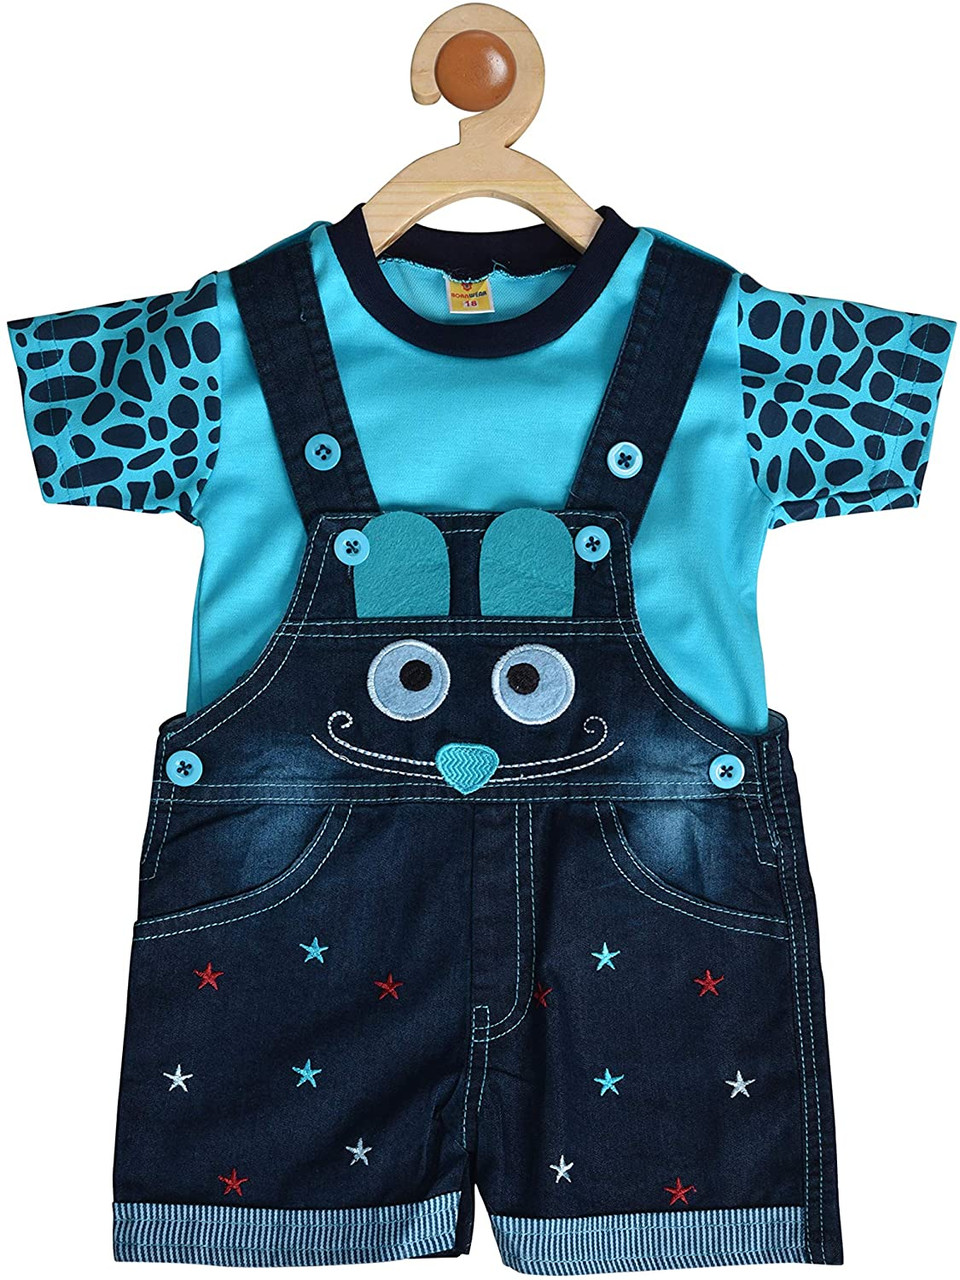 Navy Marine Print Overalls Outfit - kids atelier